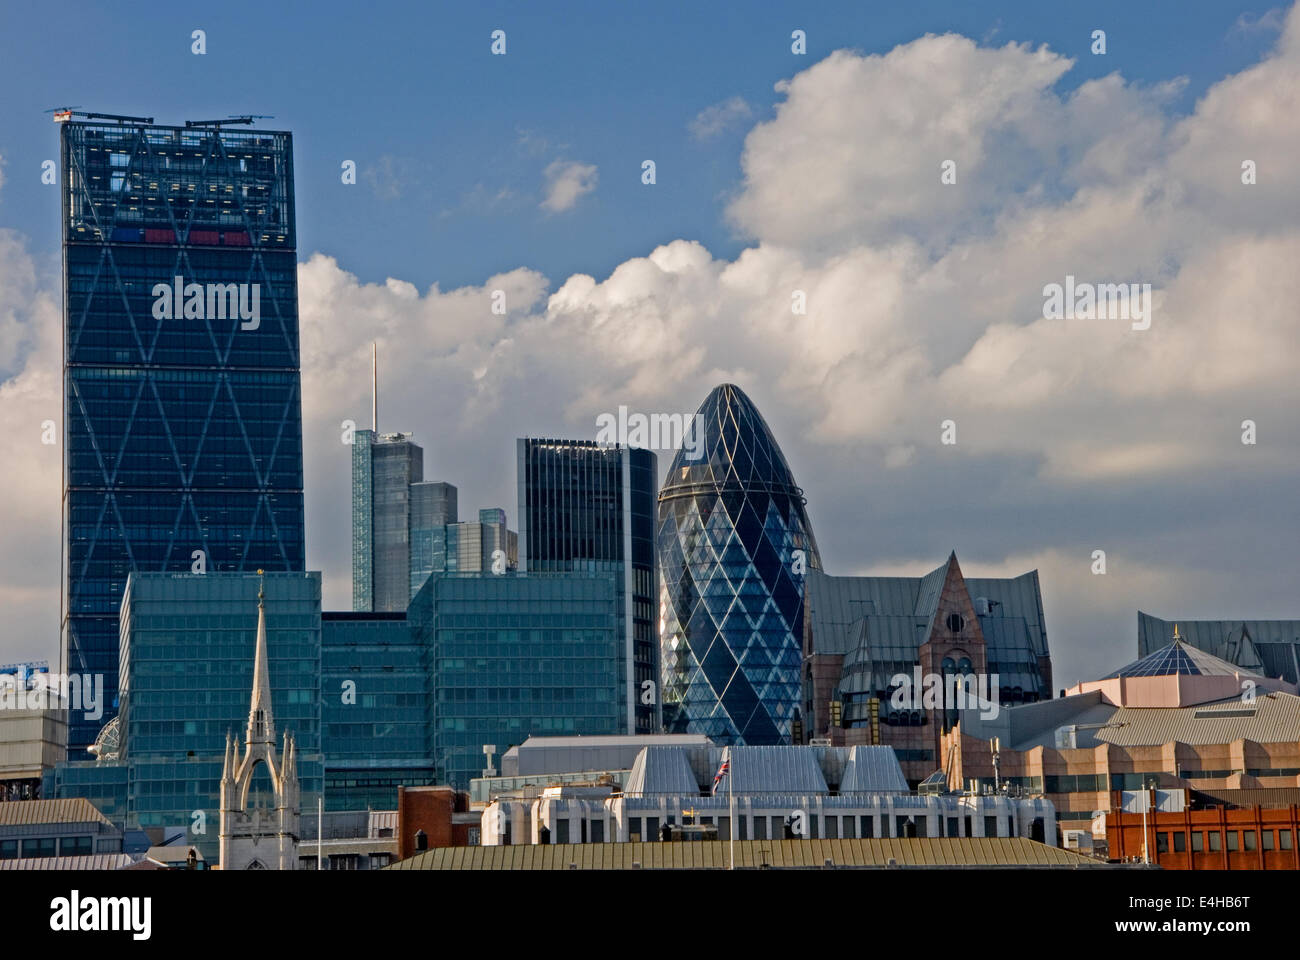 The City skyline, the financial district in London with the Gerkin building. Stock Photo